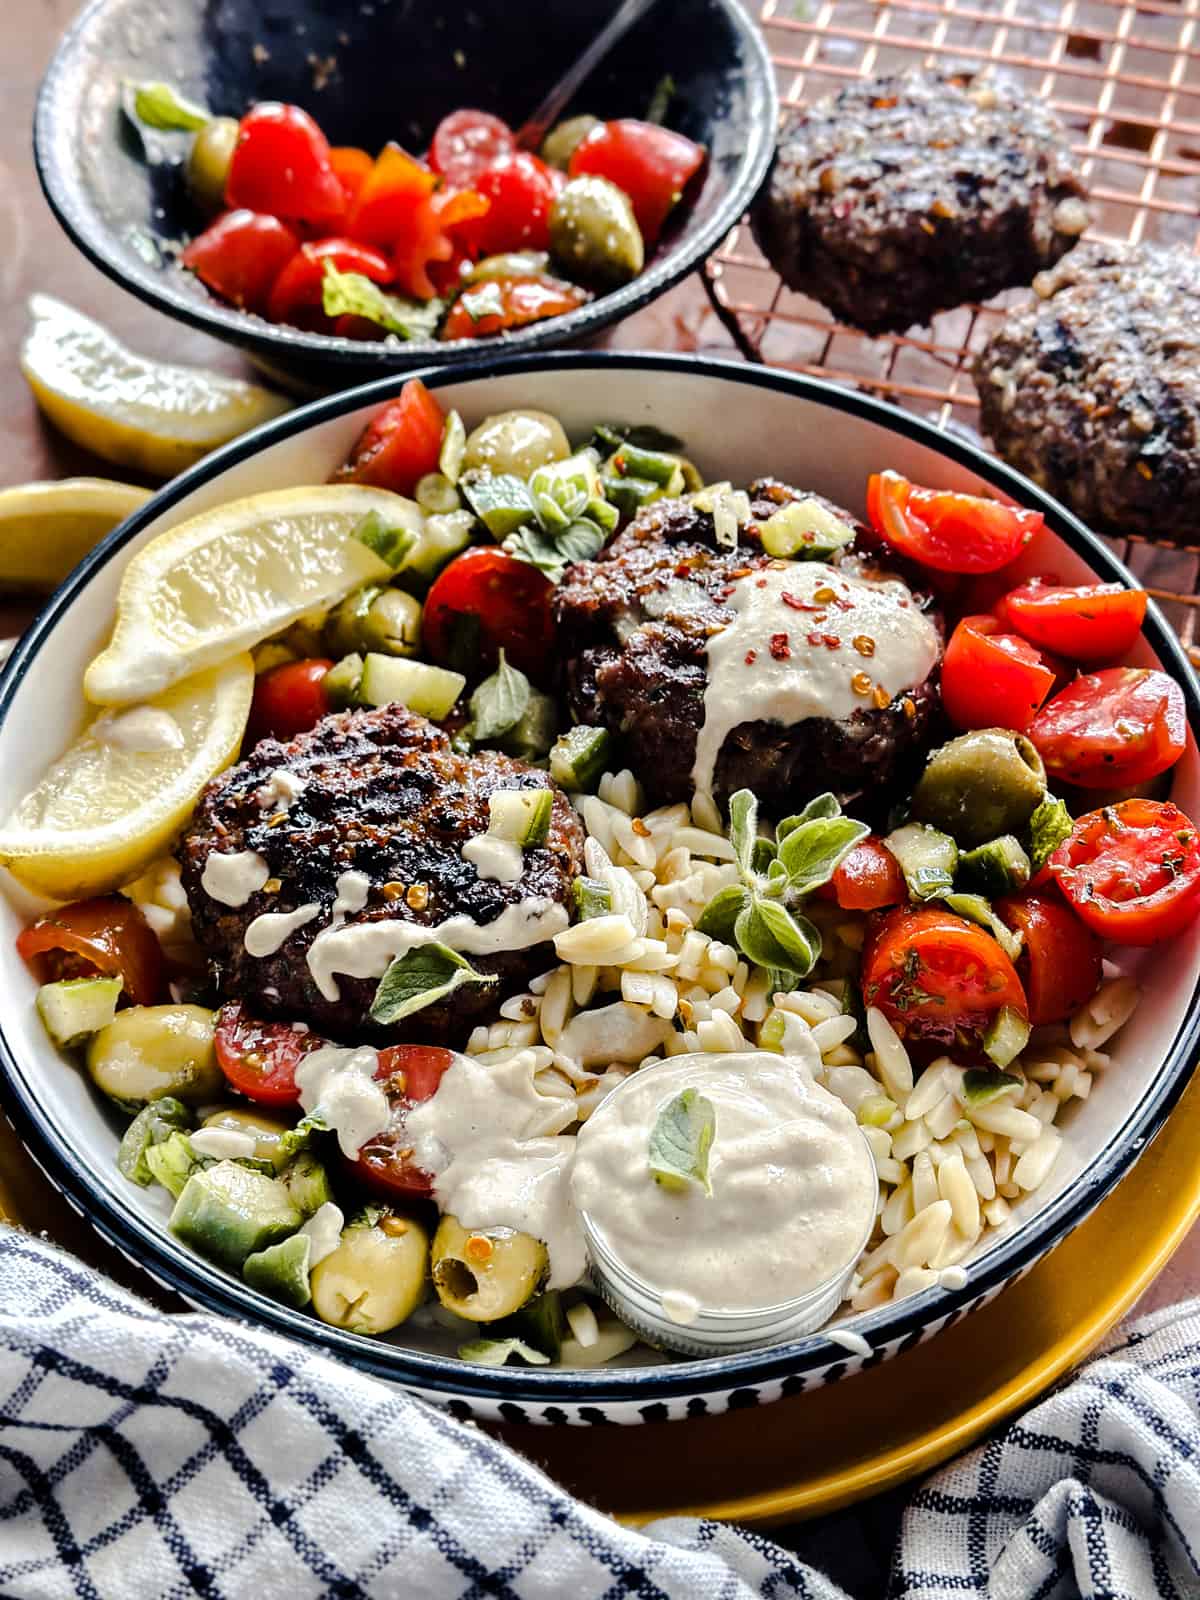 A bowl with two lamb burgers, orzo and tomato salad and lemon wedges. On the table a bowl with salad more lemon wedges and a wire rack with burgers.